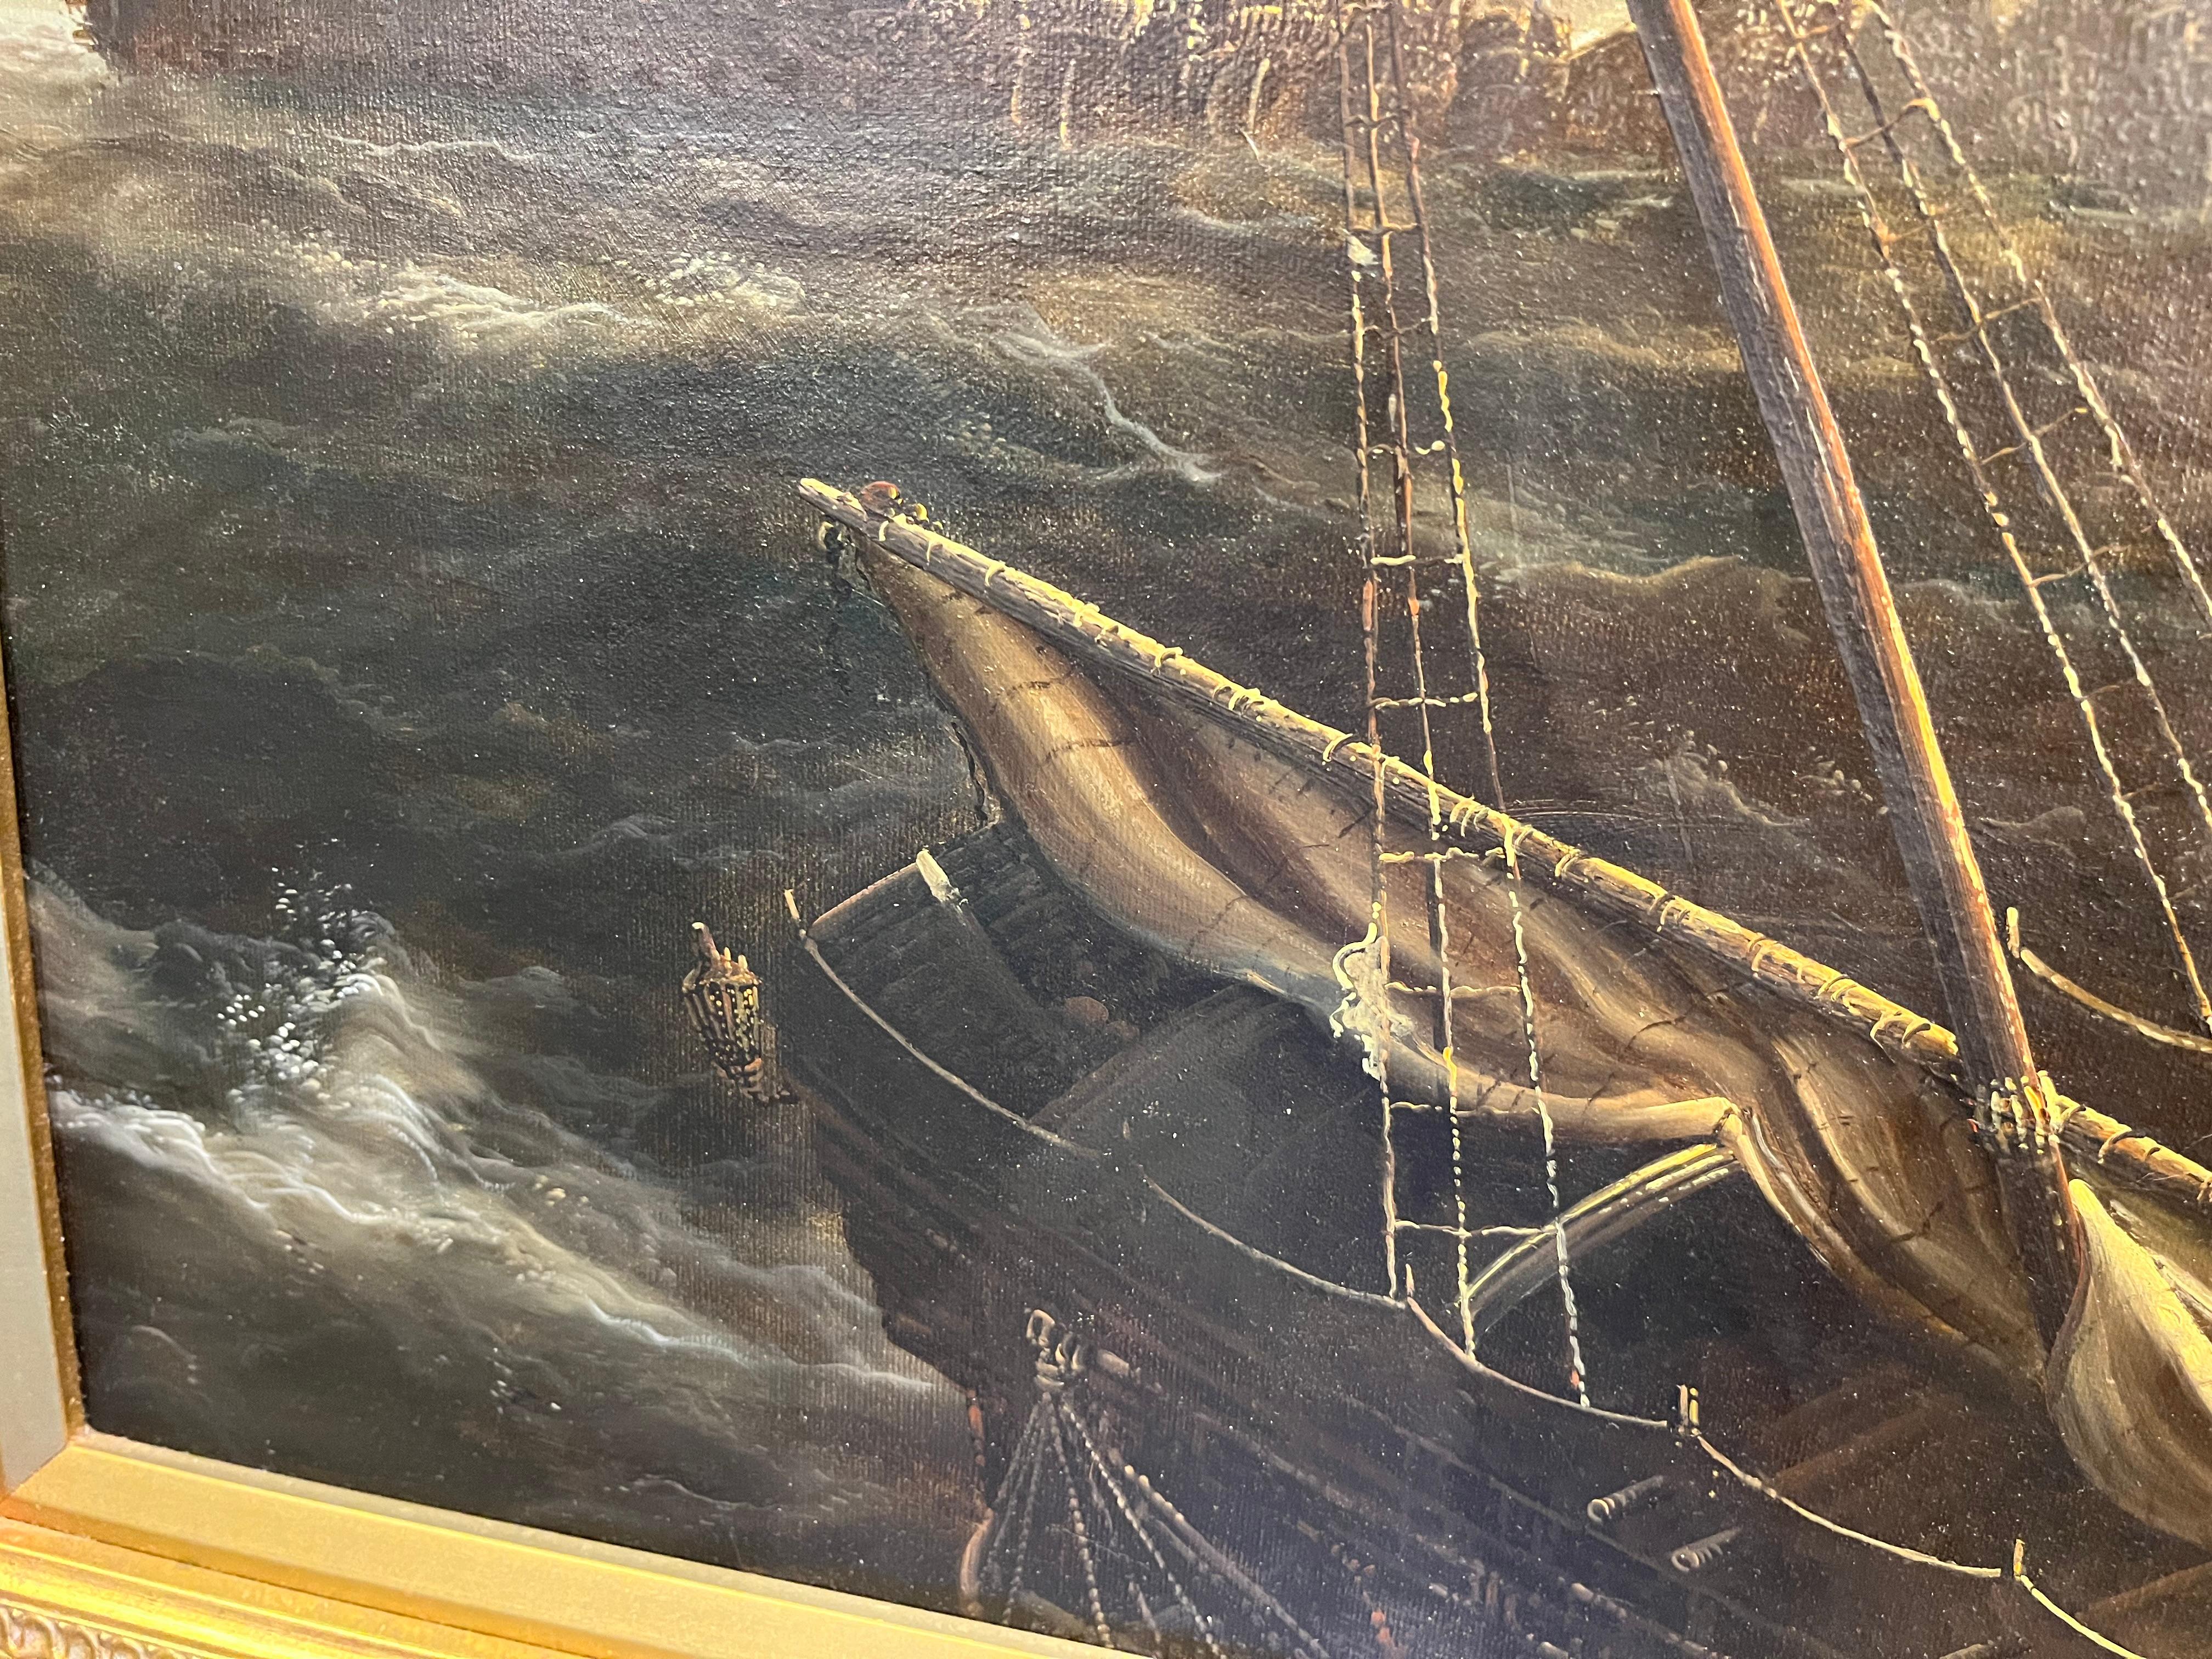 HUGE OIL PAINTING MARITIME SHIP MASTER PIECE 20th CENTURY

FINE RARE MARTINE PAINTING ORIGINAL

20th Century OLD MASTER STYLE OIL PAINTING GOLD GILT FRAME

By Similar $10,000 Premier Collection

NEW COLLECTION Of RARE PIECES OF OLD HISTORY

Good